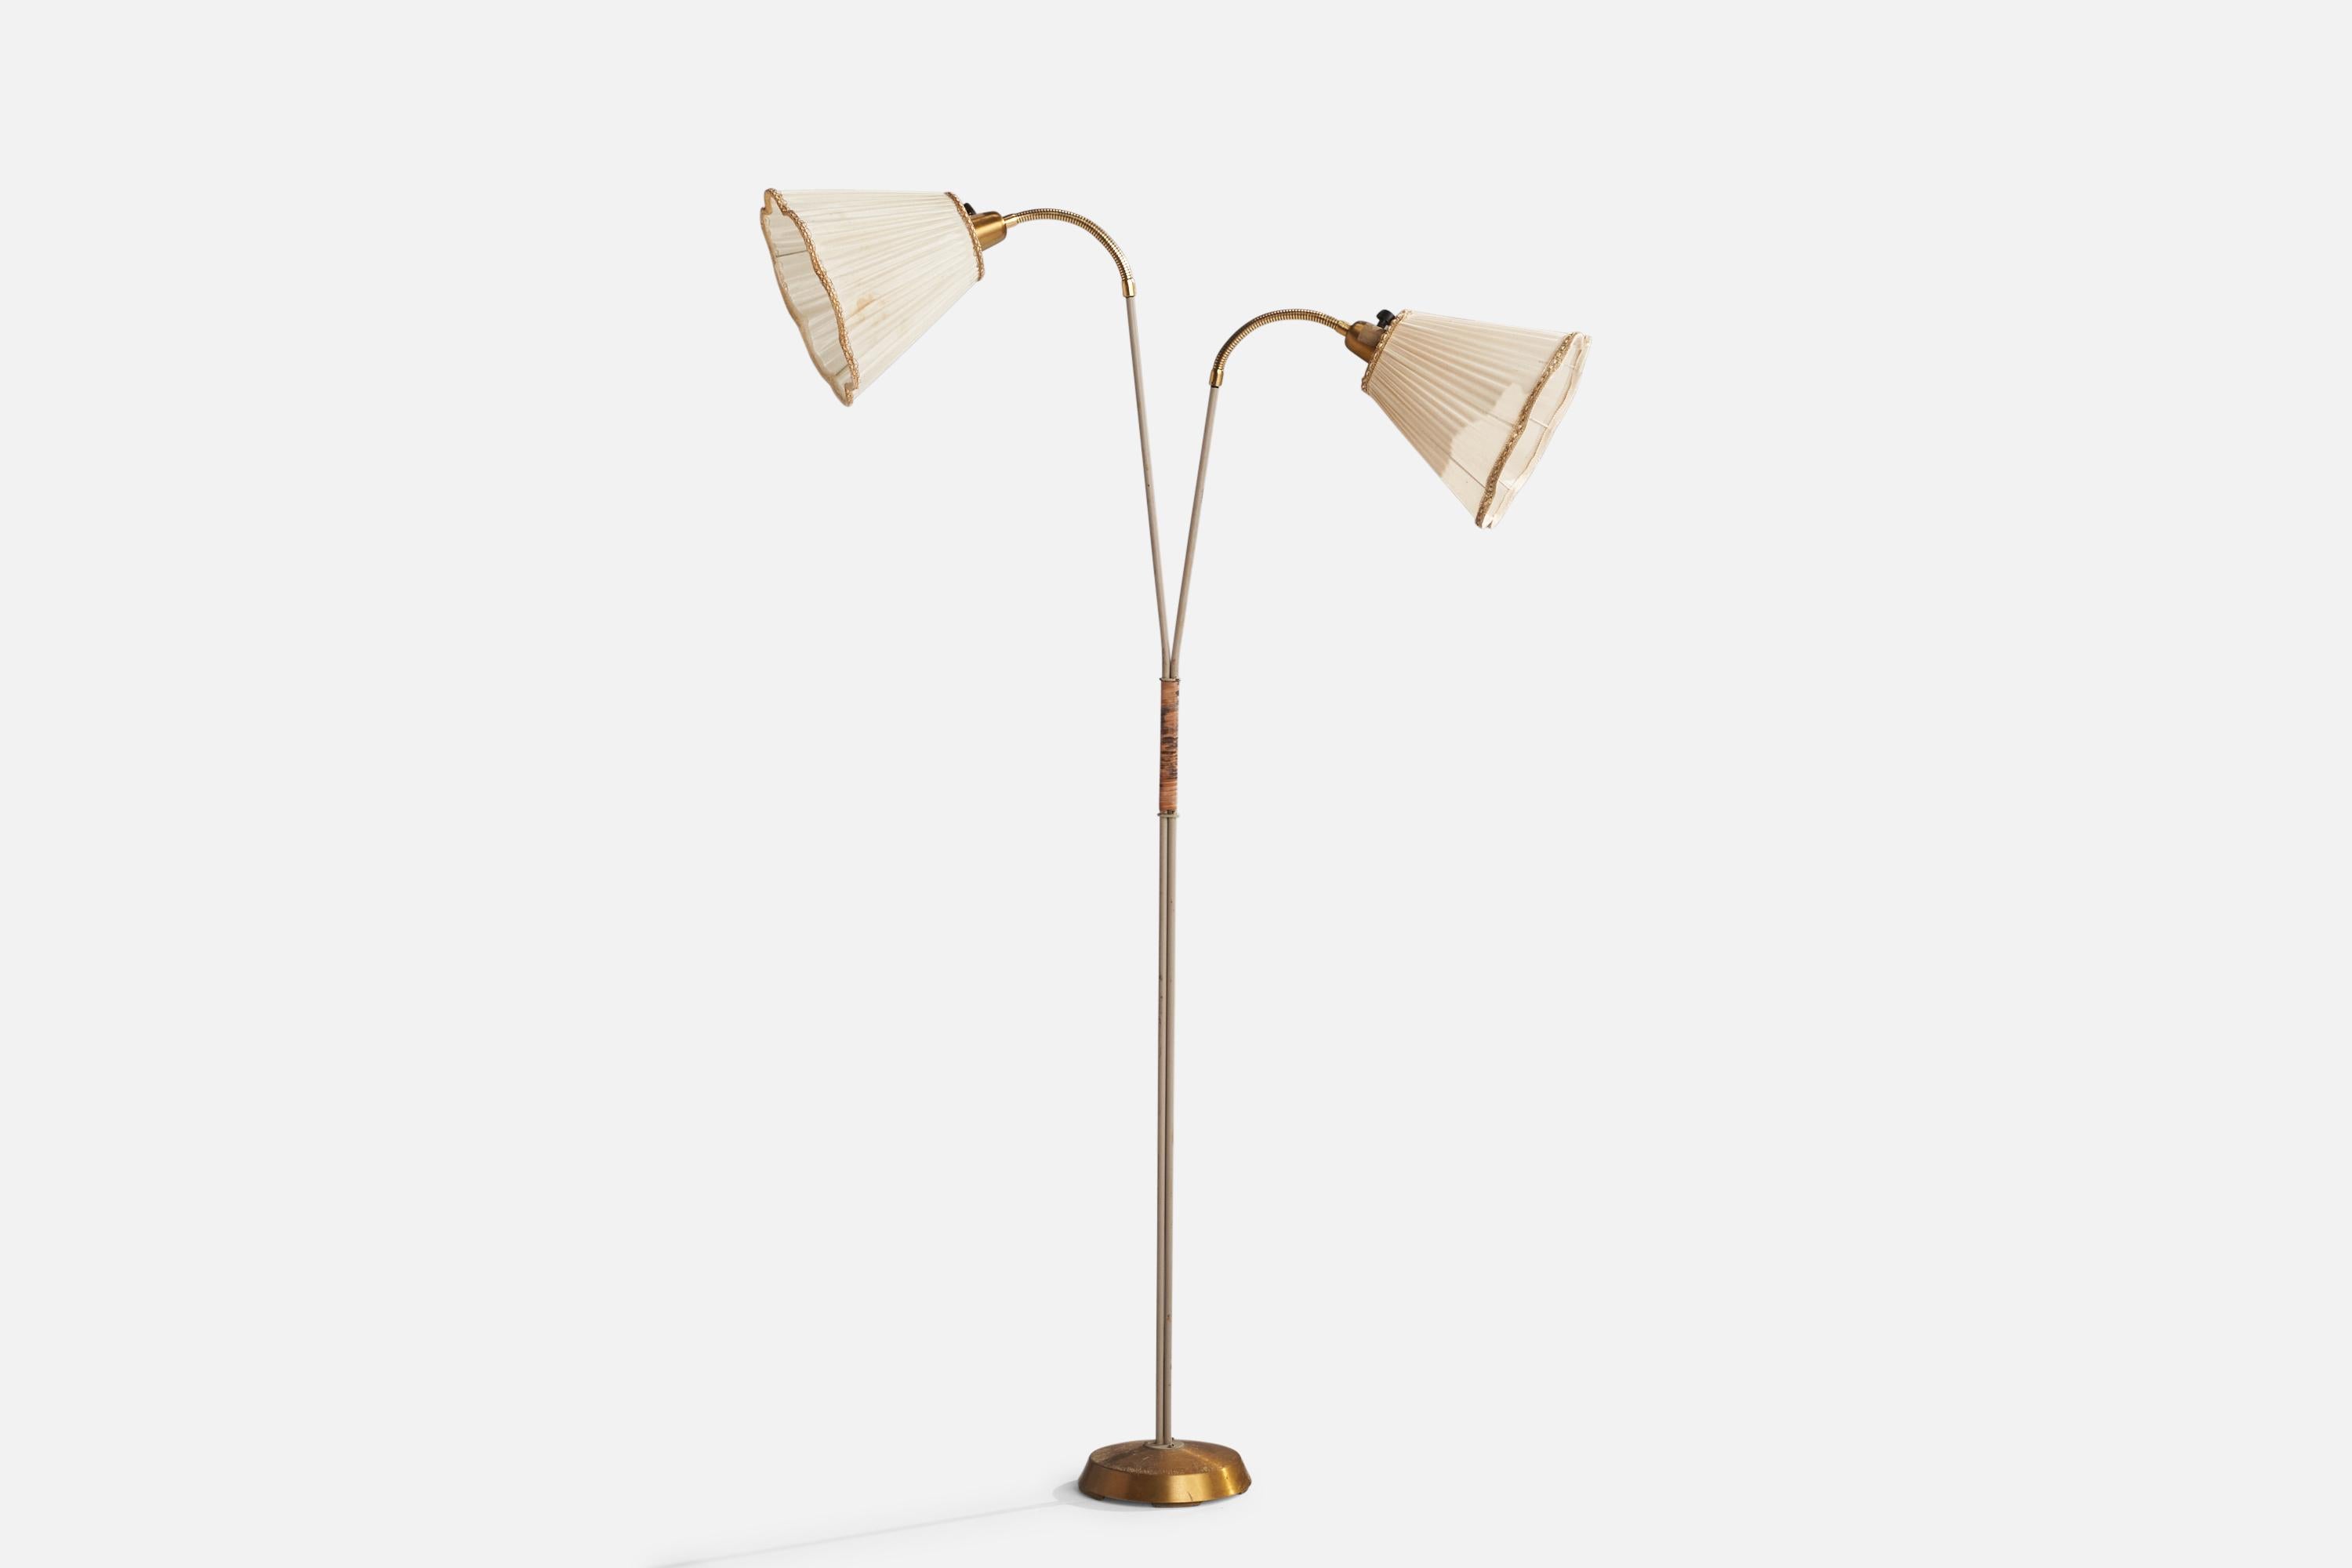 An adjustable two-armed brass, grey-lacquered metal, rattan and fabric floor lamp designed and produced by Einar Bäckström, Sweden, 1950s.

Dimension variable

Overall Dimensions (inches): 62”  H x 32”  W x 15” D
Stated dimensions include